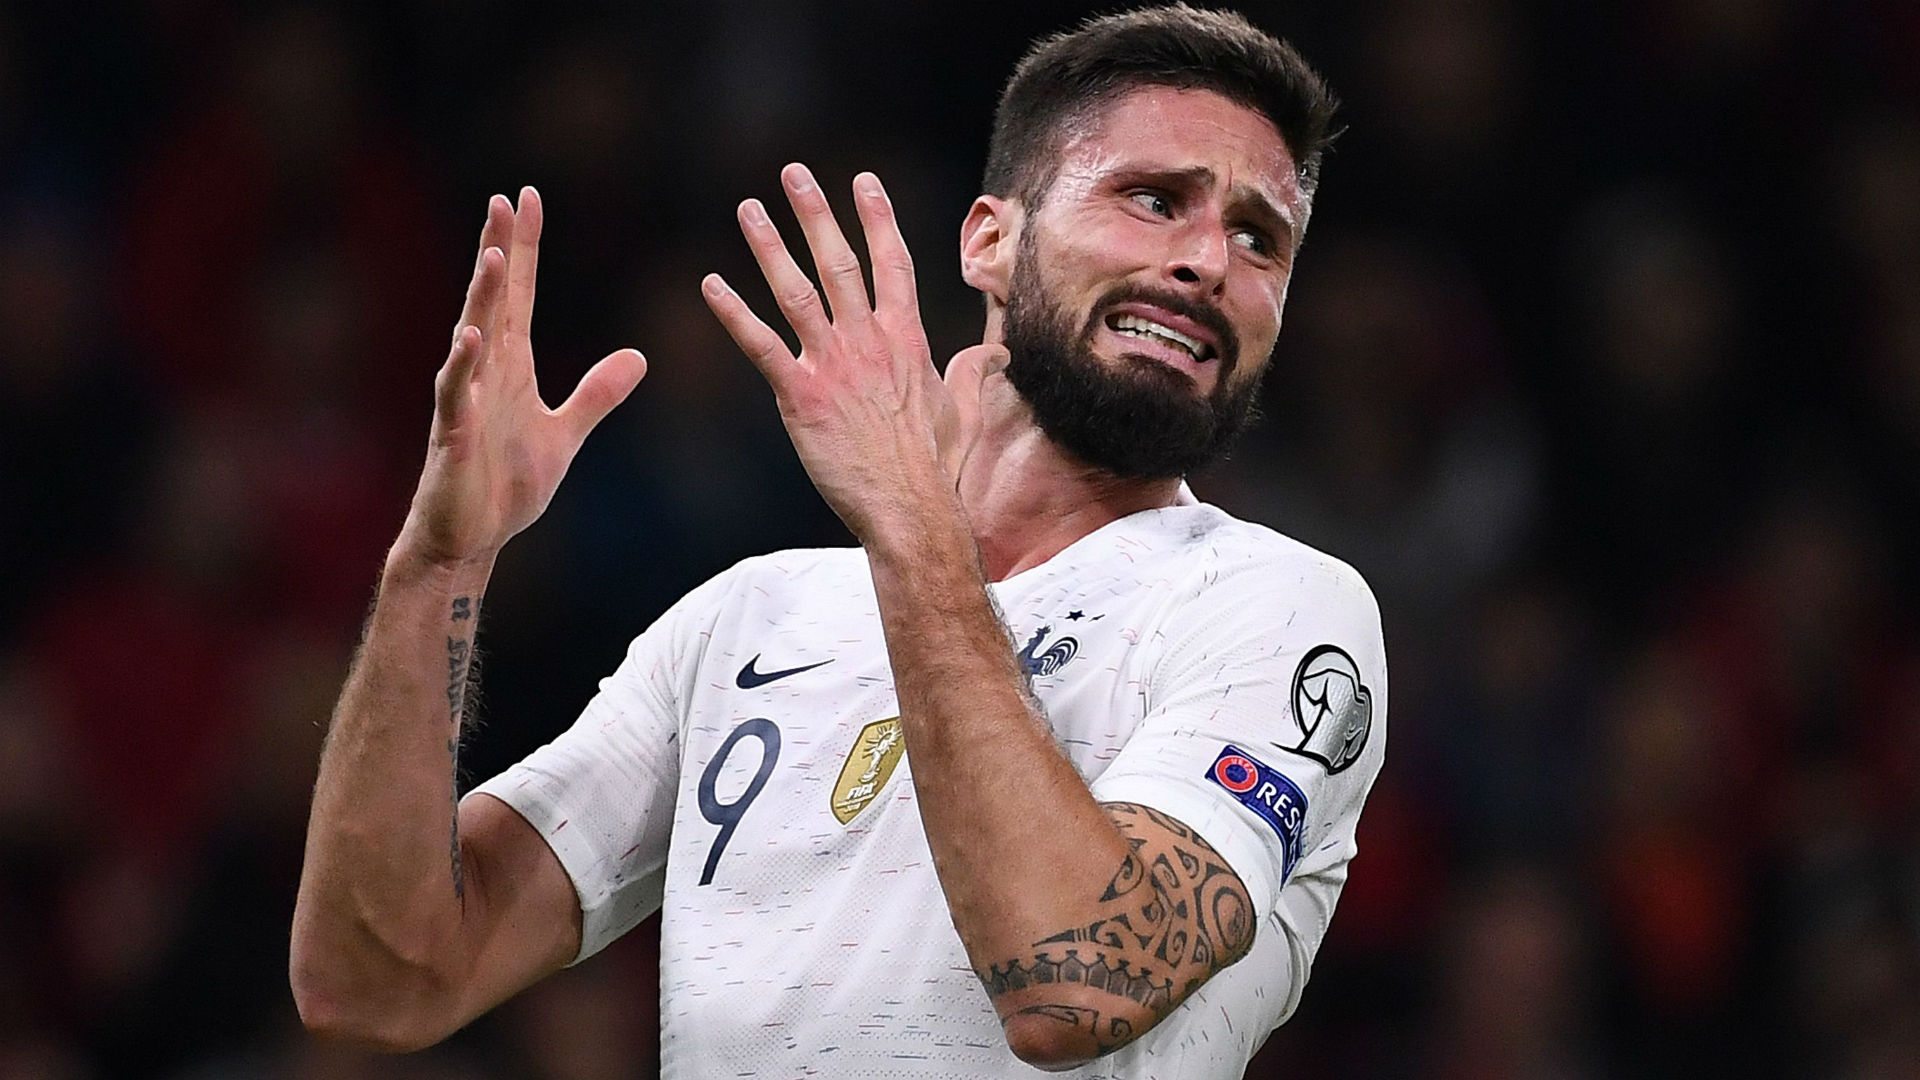 'I'm still thirsty for trophies' - Giroud ambitious to make history for France